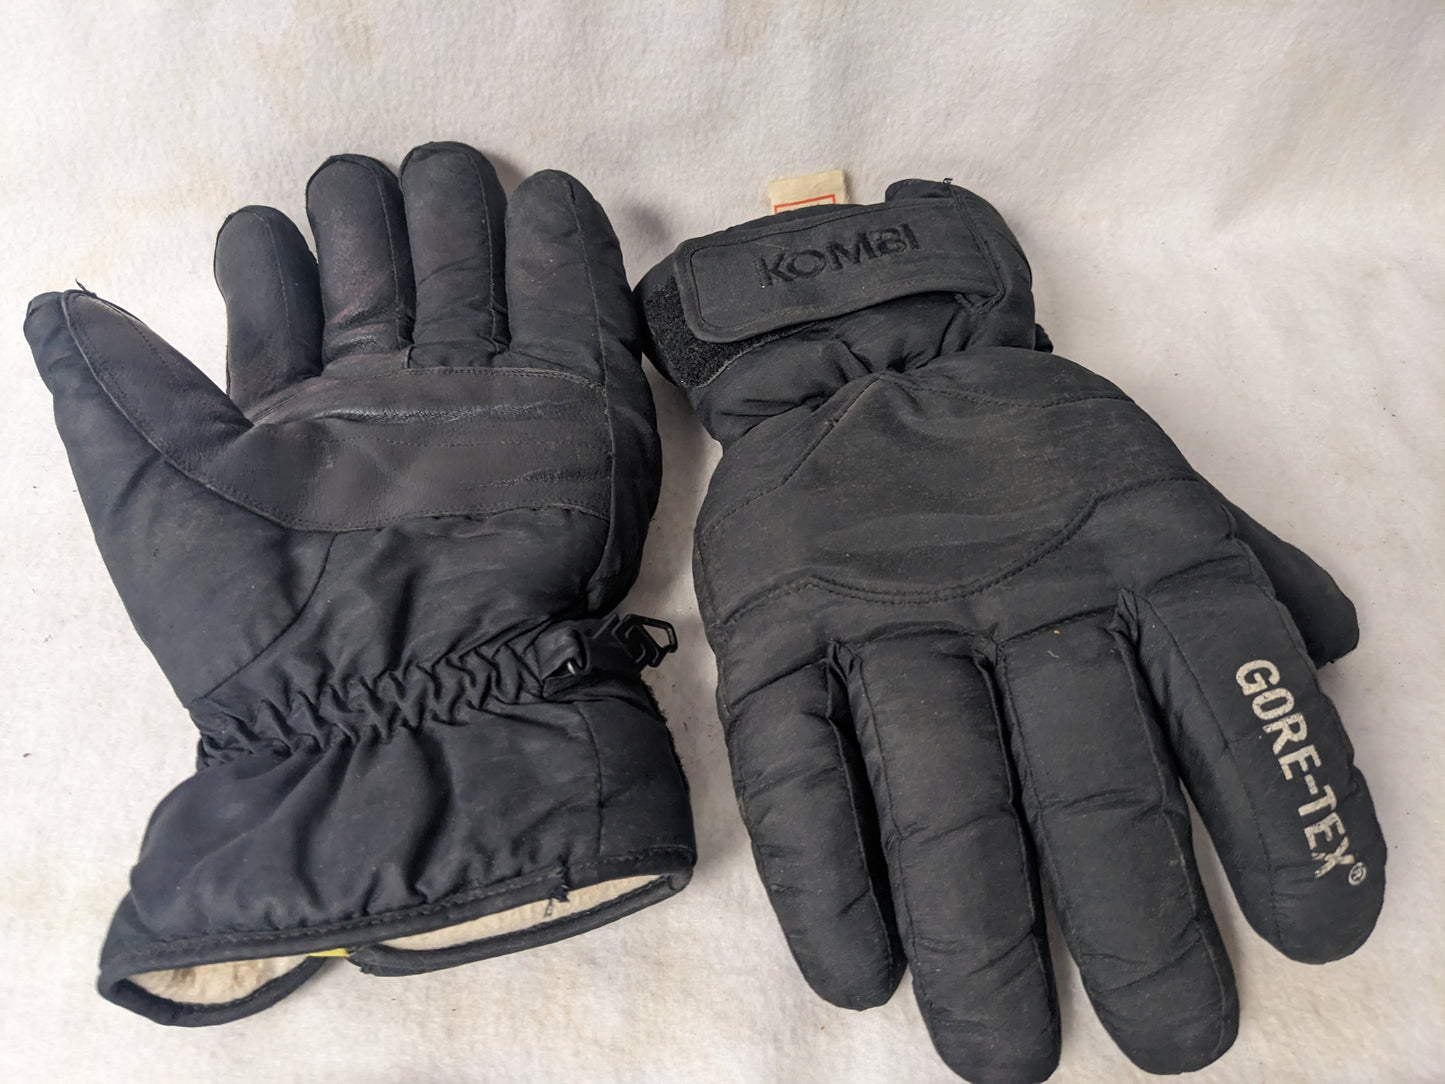 Kombi Gore-Tex Winter Gloves Size Large Color Black Condition Used